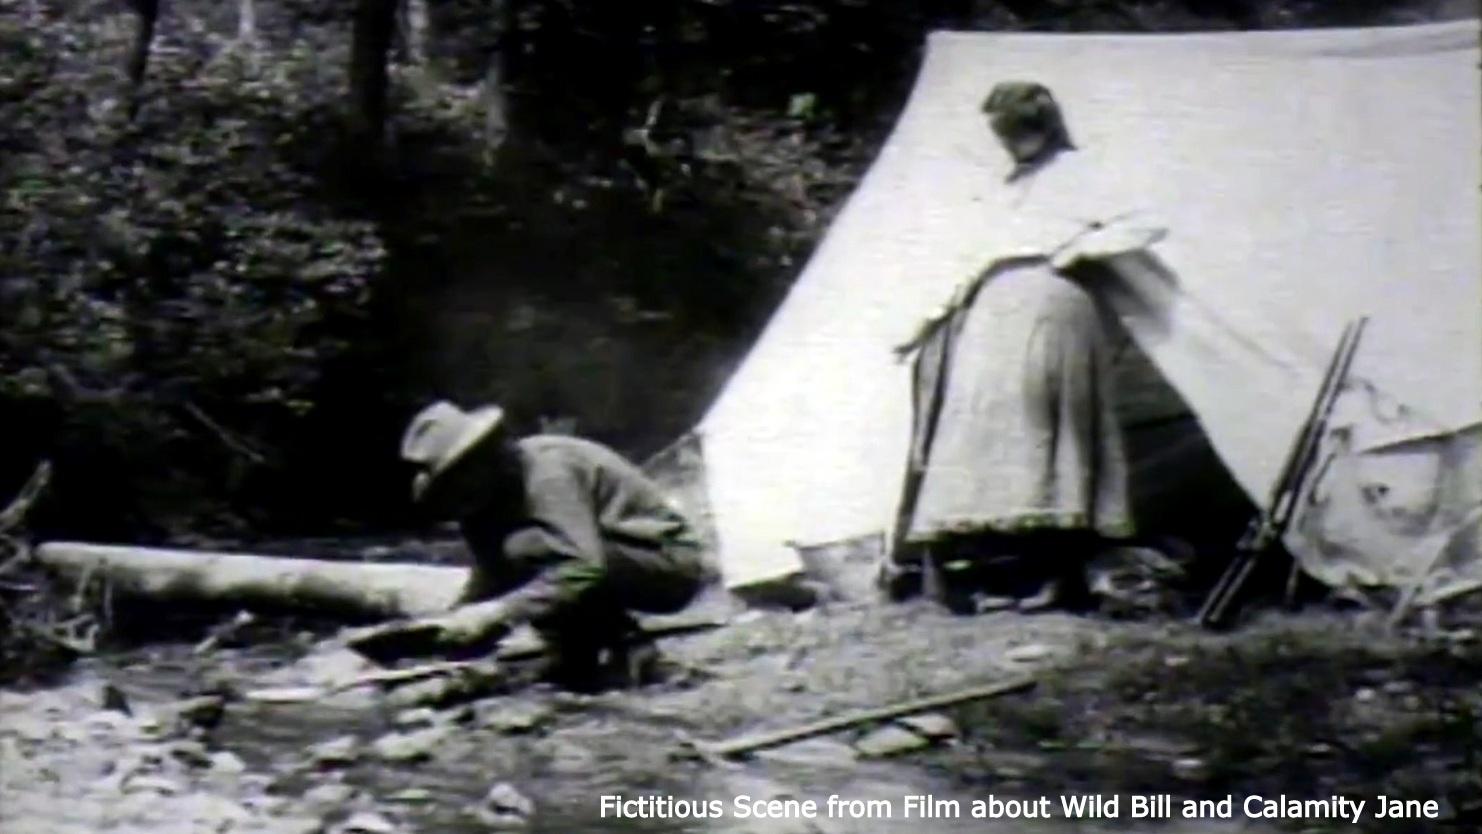 An image of a man and a woman near a tent. The man is panning for gold, and the woman stands behind him. 